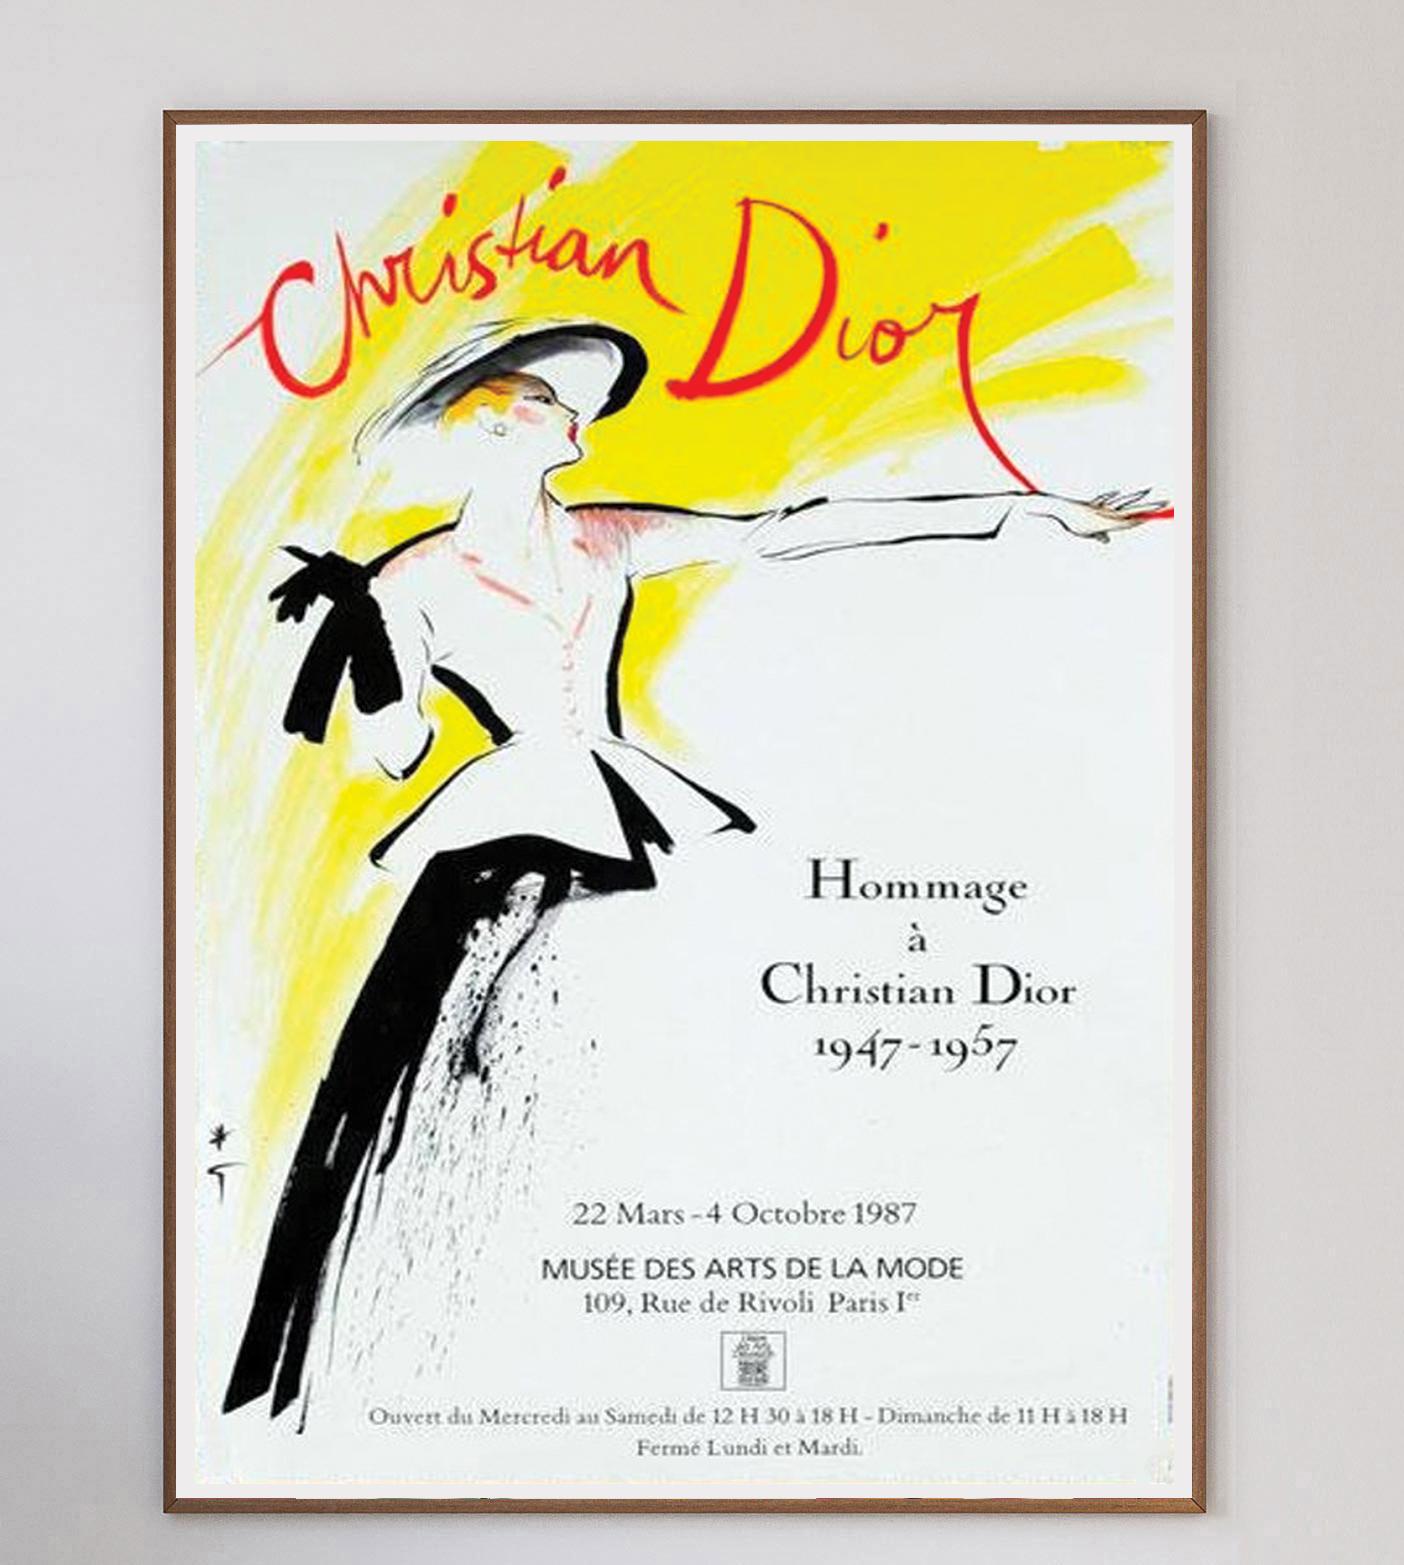 Celebrating a decade of Dior’s work between 1947-57, this stunning poster from the 1987 exhibition in Paris features artwork from the incredible poster artist Rene Gruau. Well known for his many collaborations with Dior, Gruau is also best known for